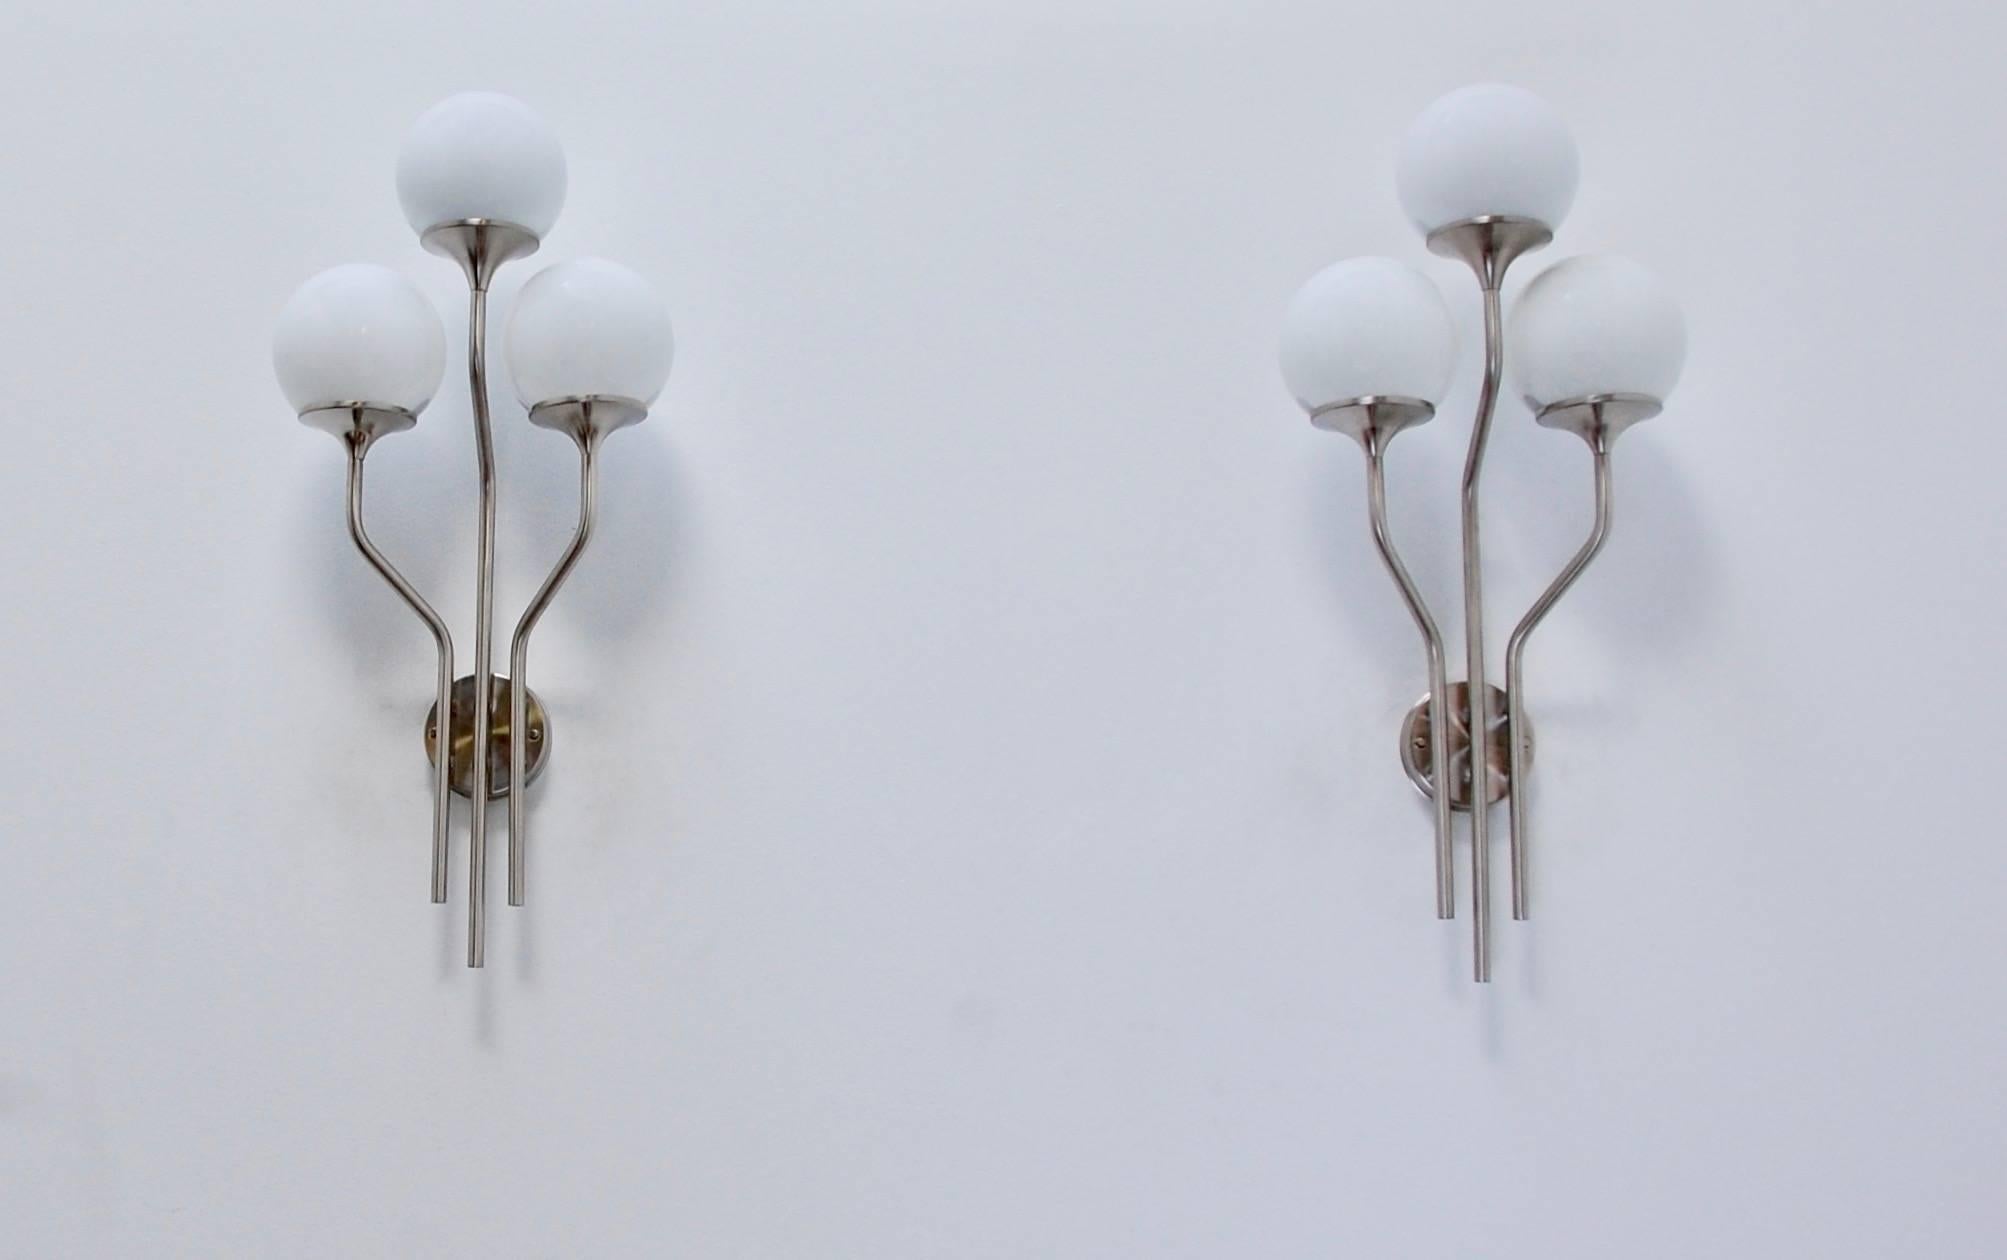 (1) Statuesque satin nickel large Lamperti sconce from Italy. Fully restored, and rewired and ready for use in the US. We can rewire for use anywhere in the world. Currently has three E12 candelabra based sockets per globe shade. 120 watts max per